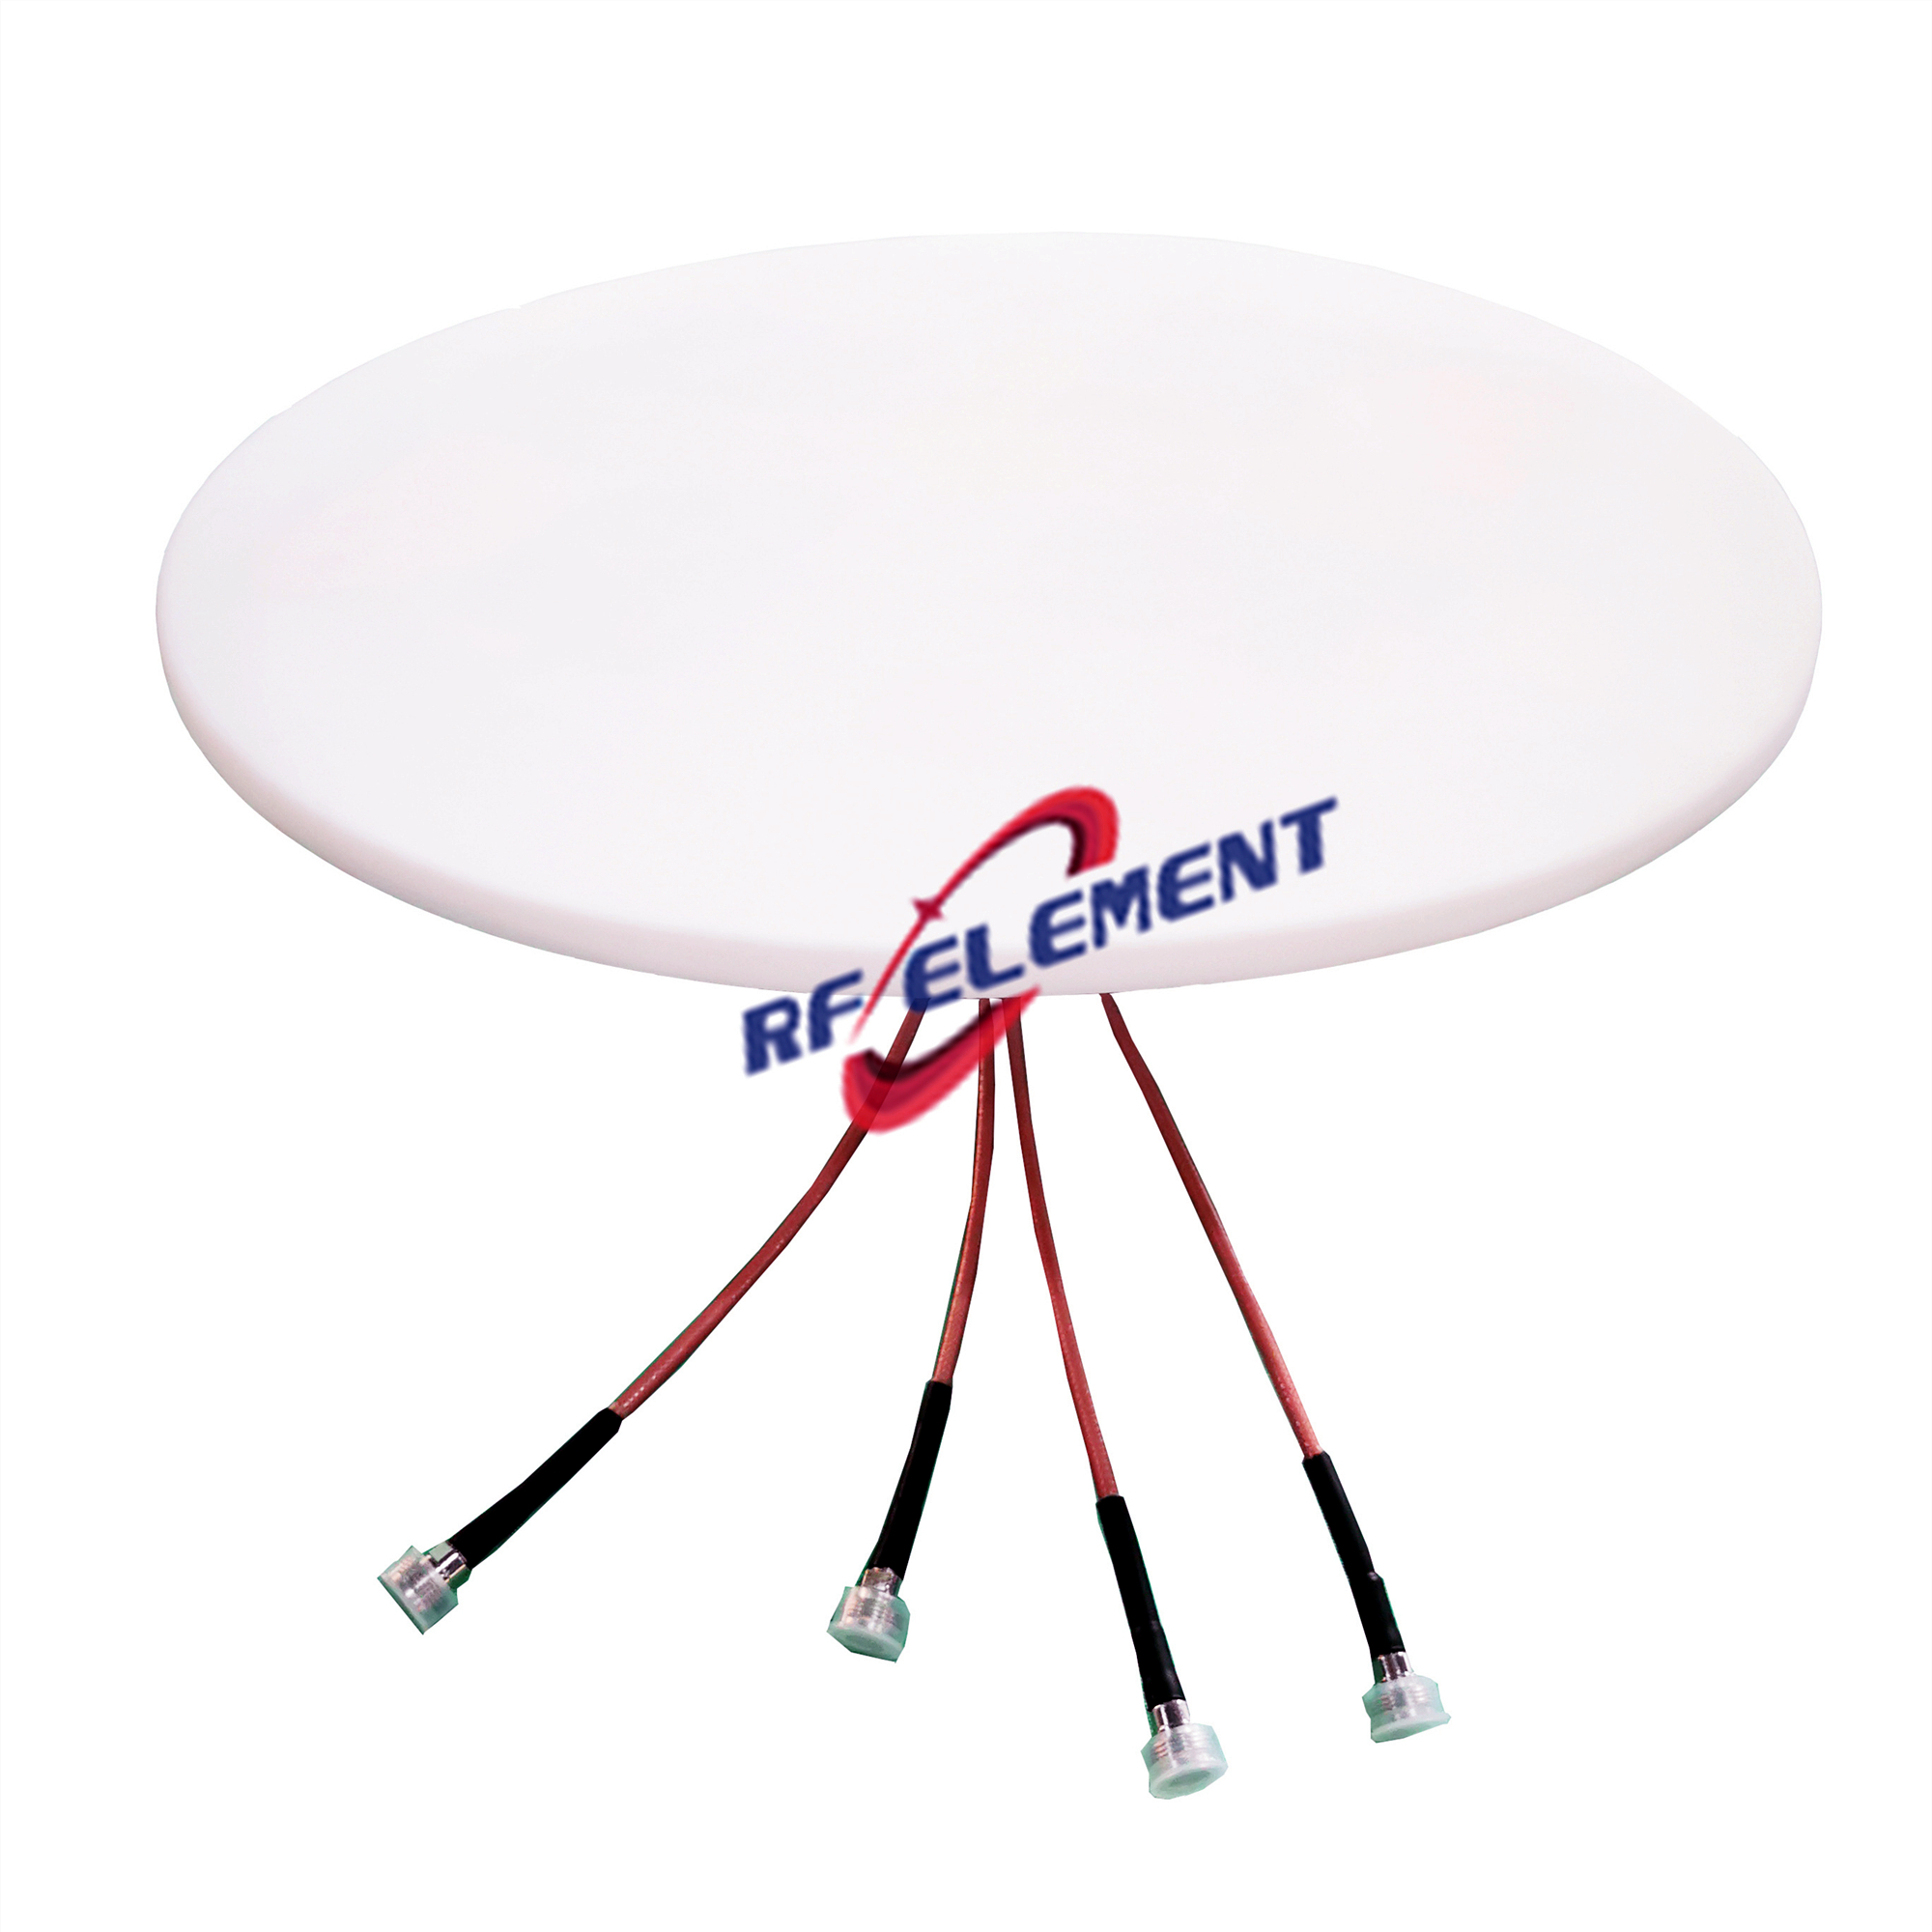 4x4 mimo low profile ceiling antenna.jpg